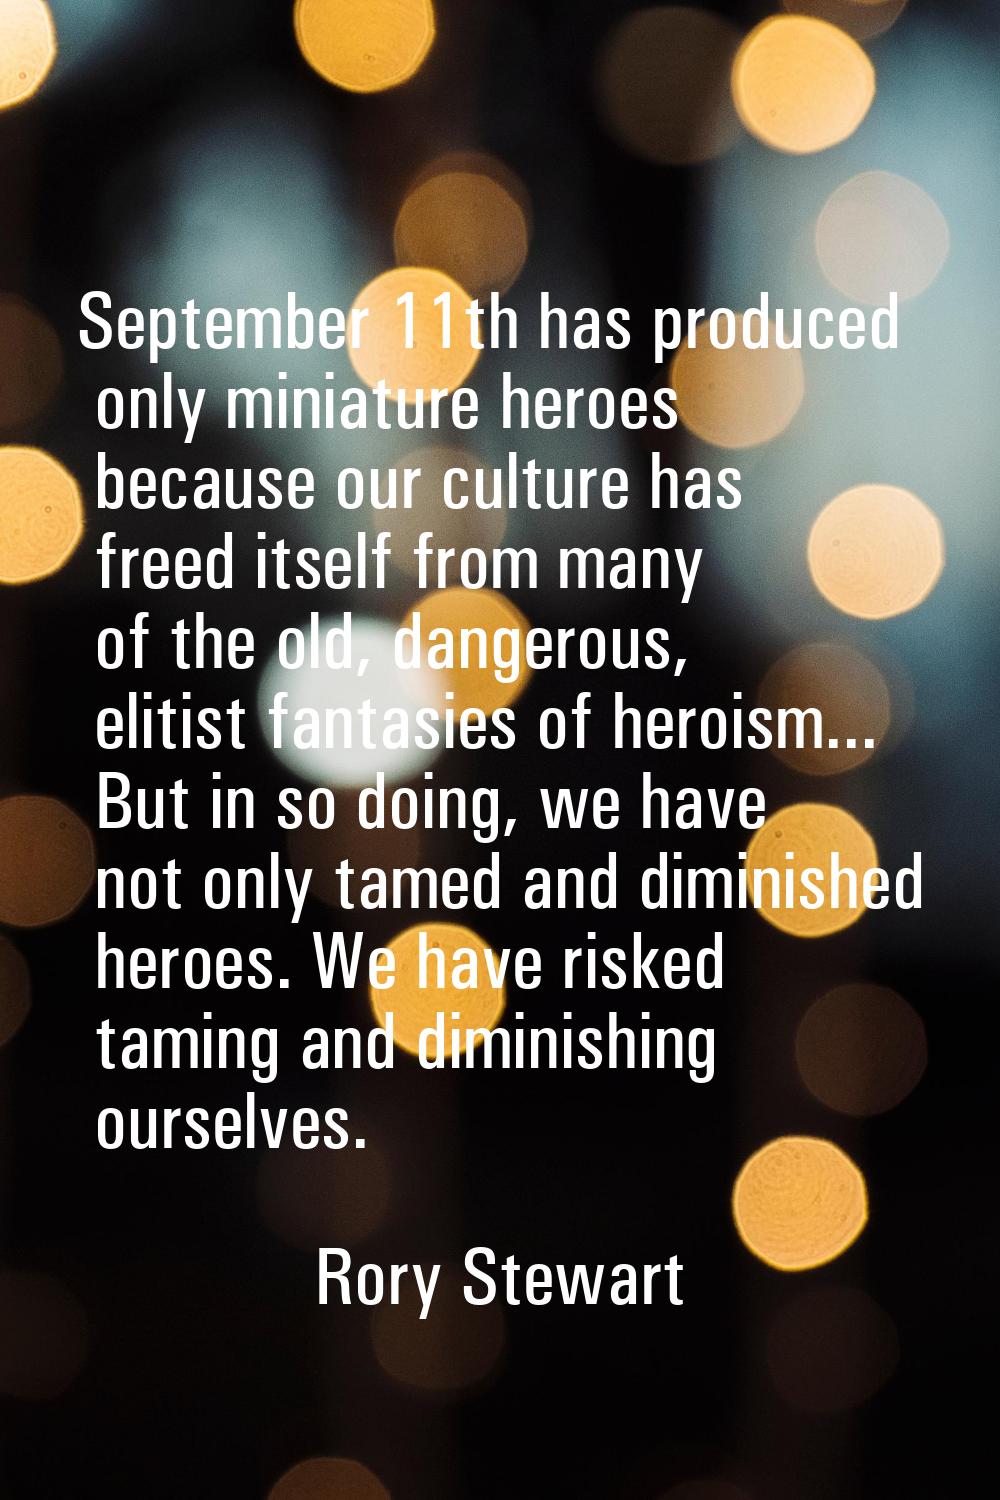 September 11th has produced only miniature heroes because our culture has freed itself from many of